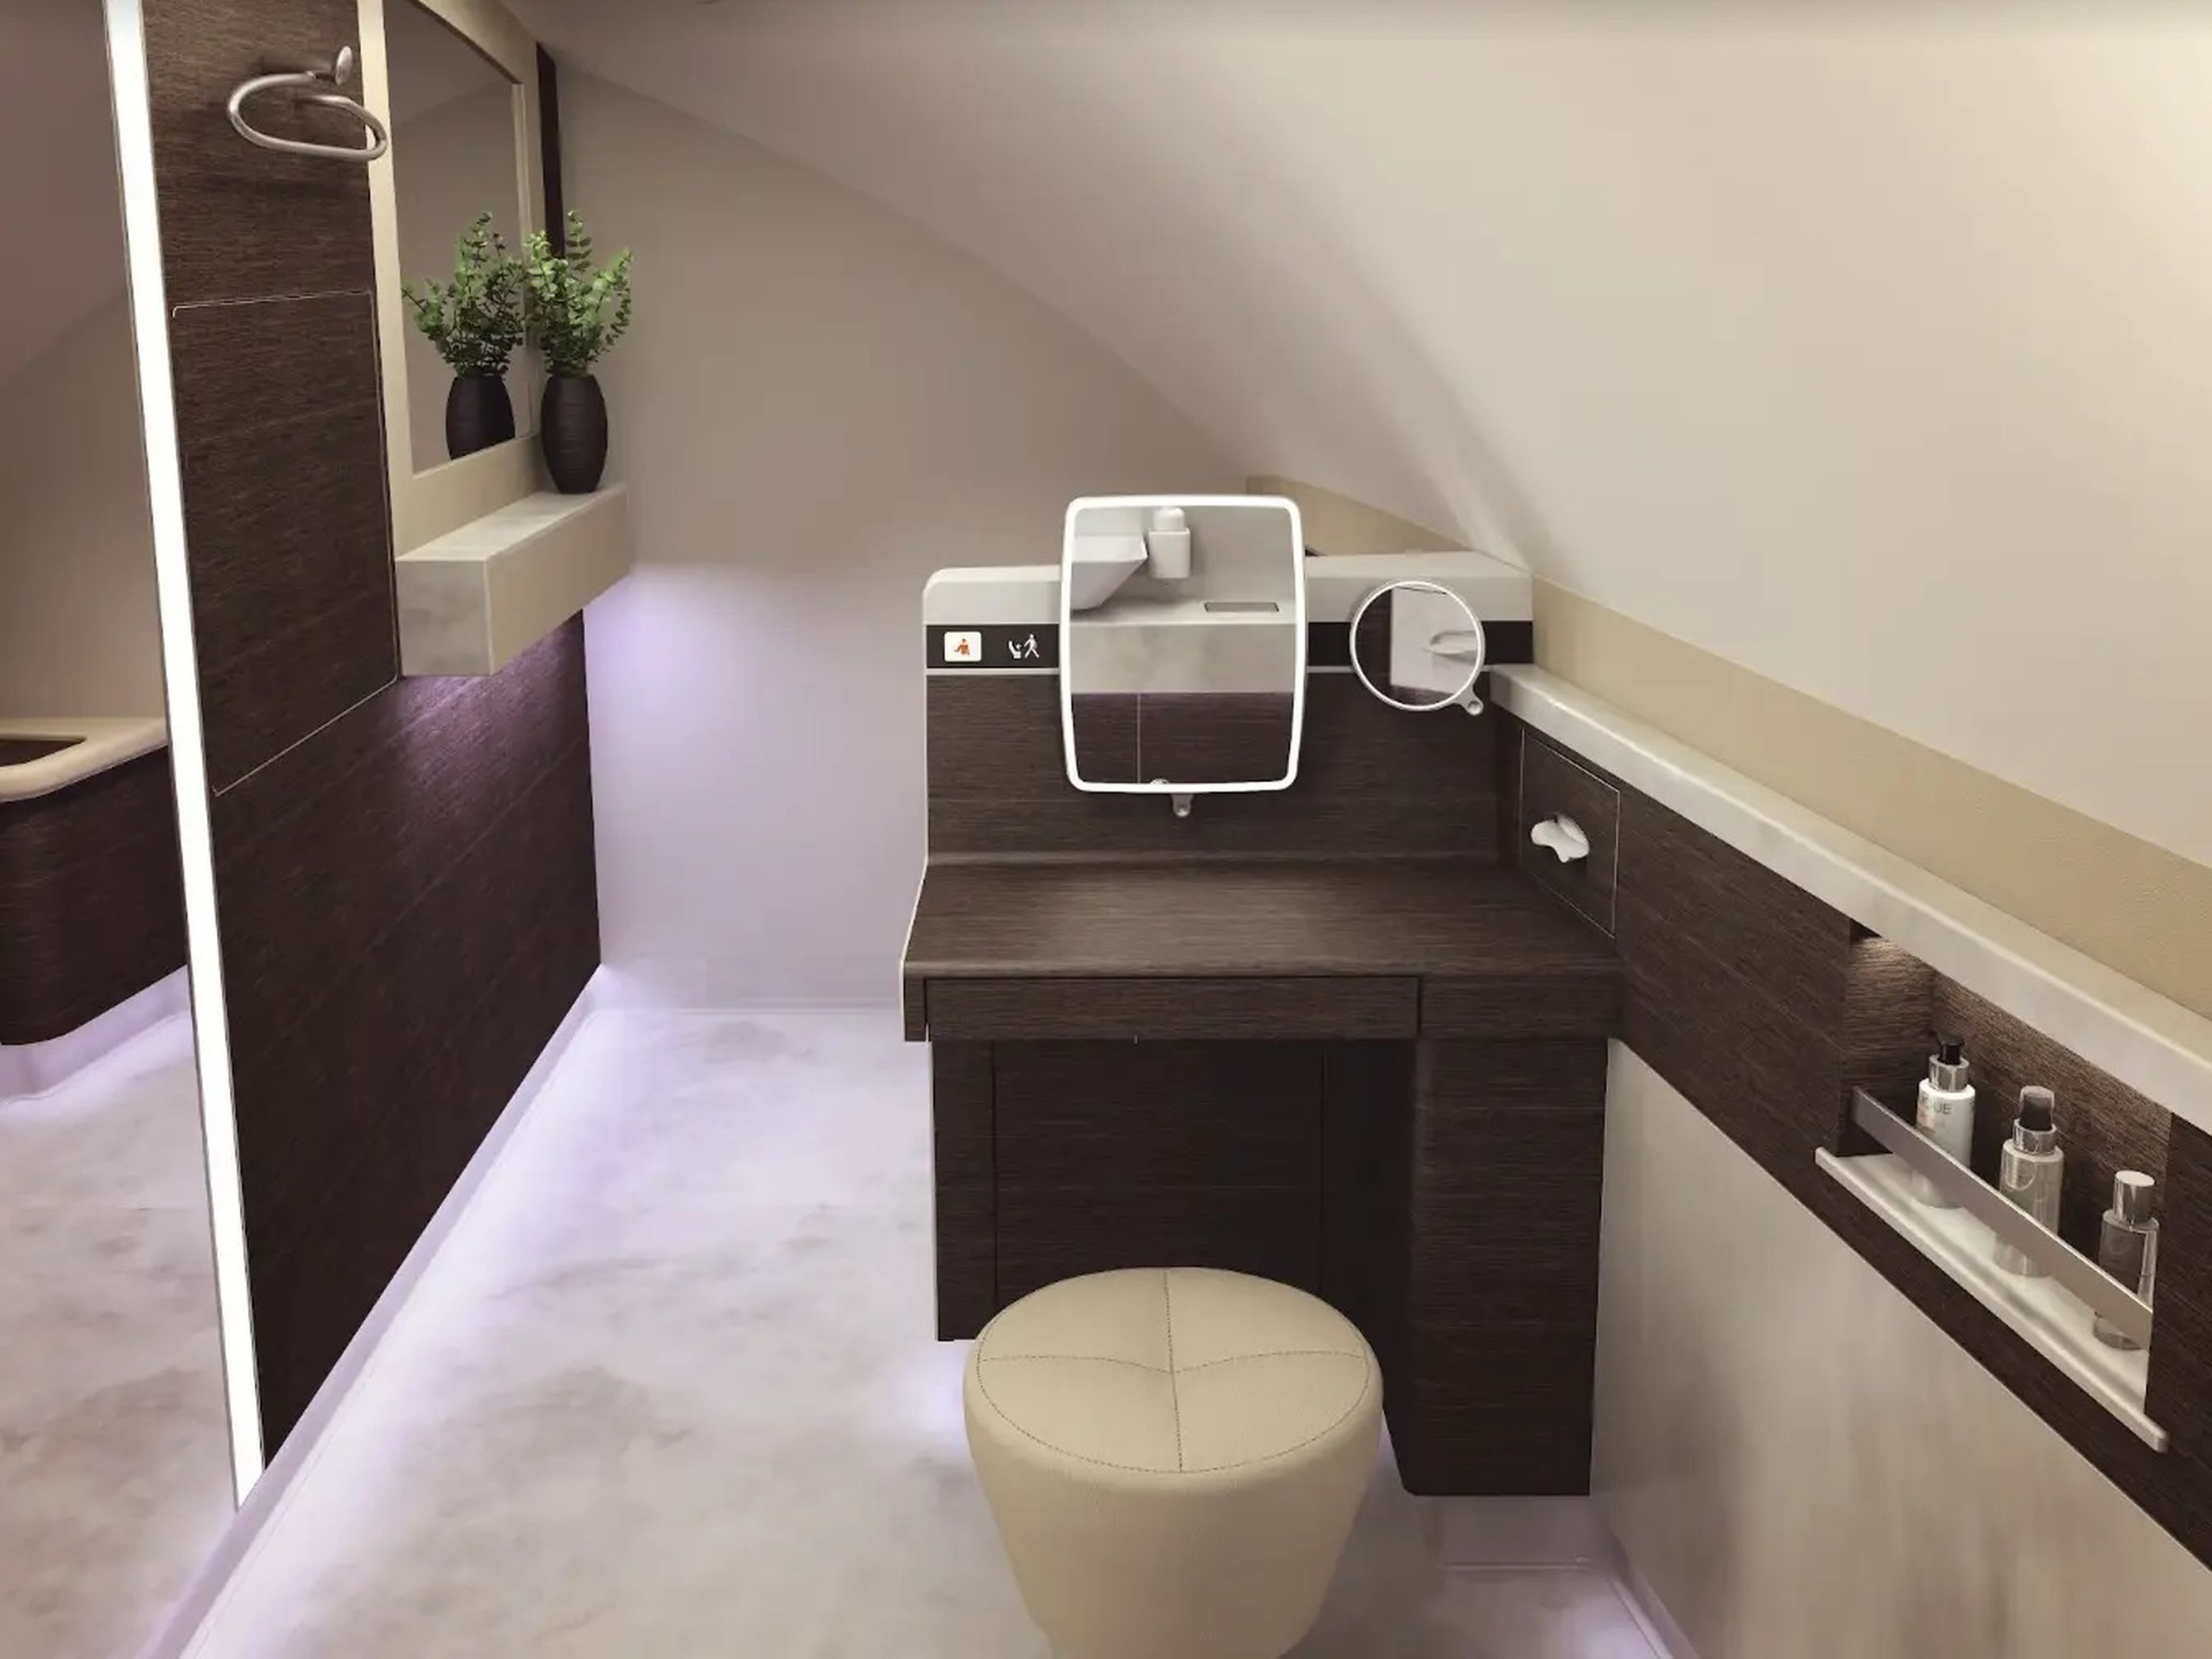 Singapore's first-class suite also comes with access to two huge lavatories, both of which feature a vanity table.